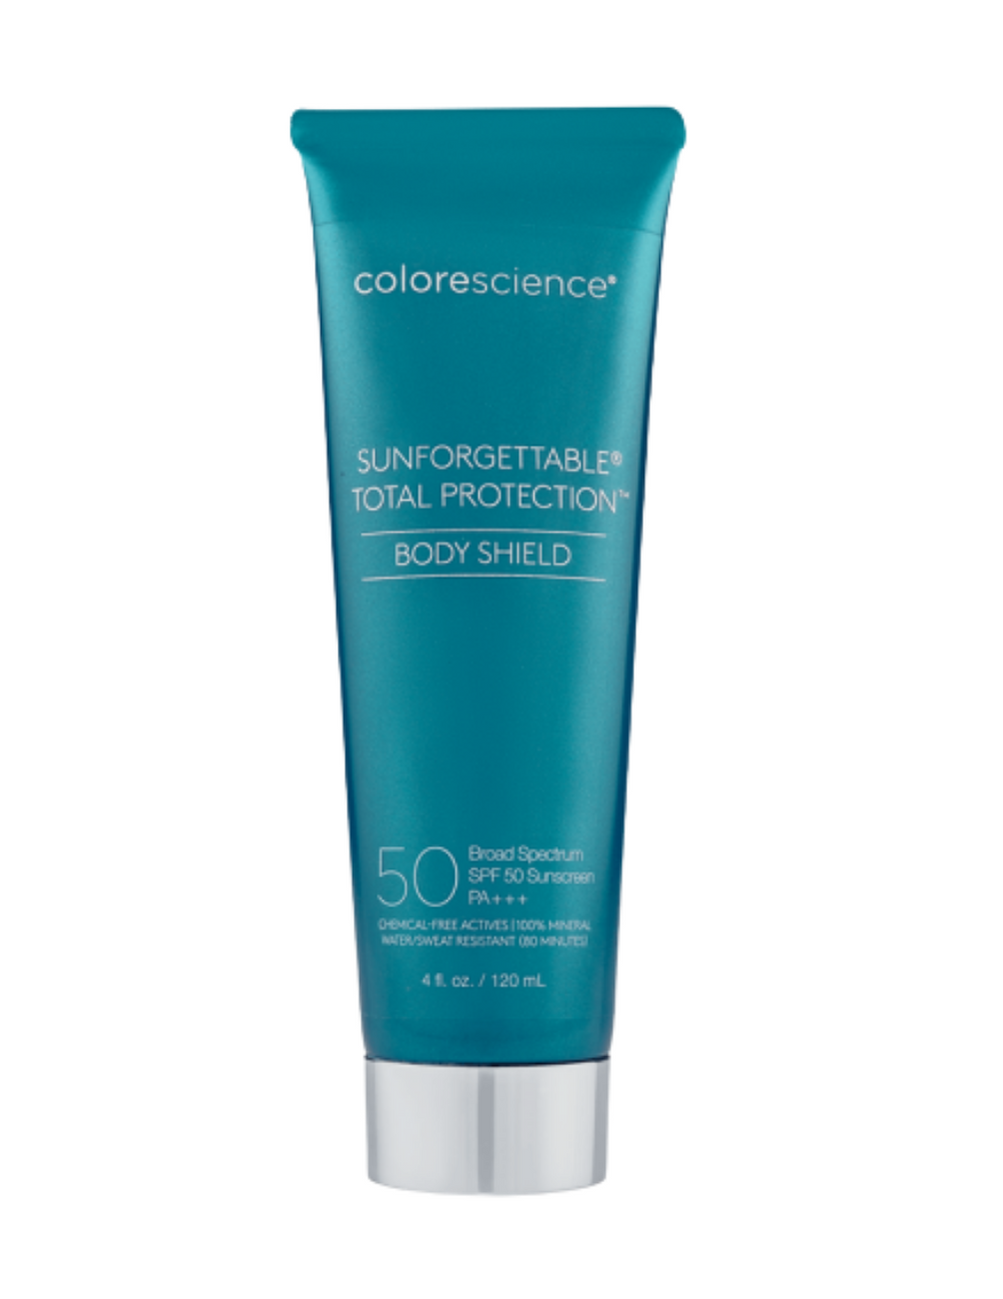 SUNFORGETTABLE® TOTAL PROTECTION™ BODY SHIELD CLASSIC SPF 50